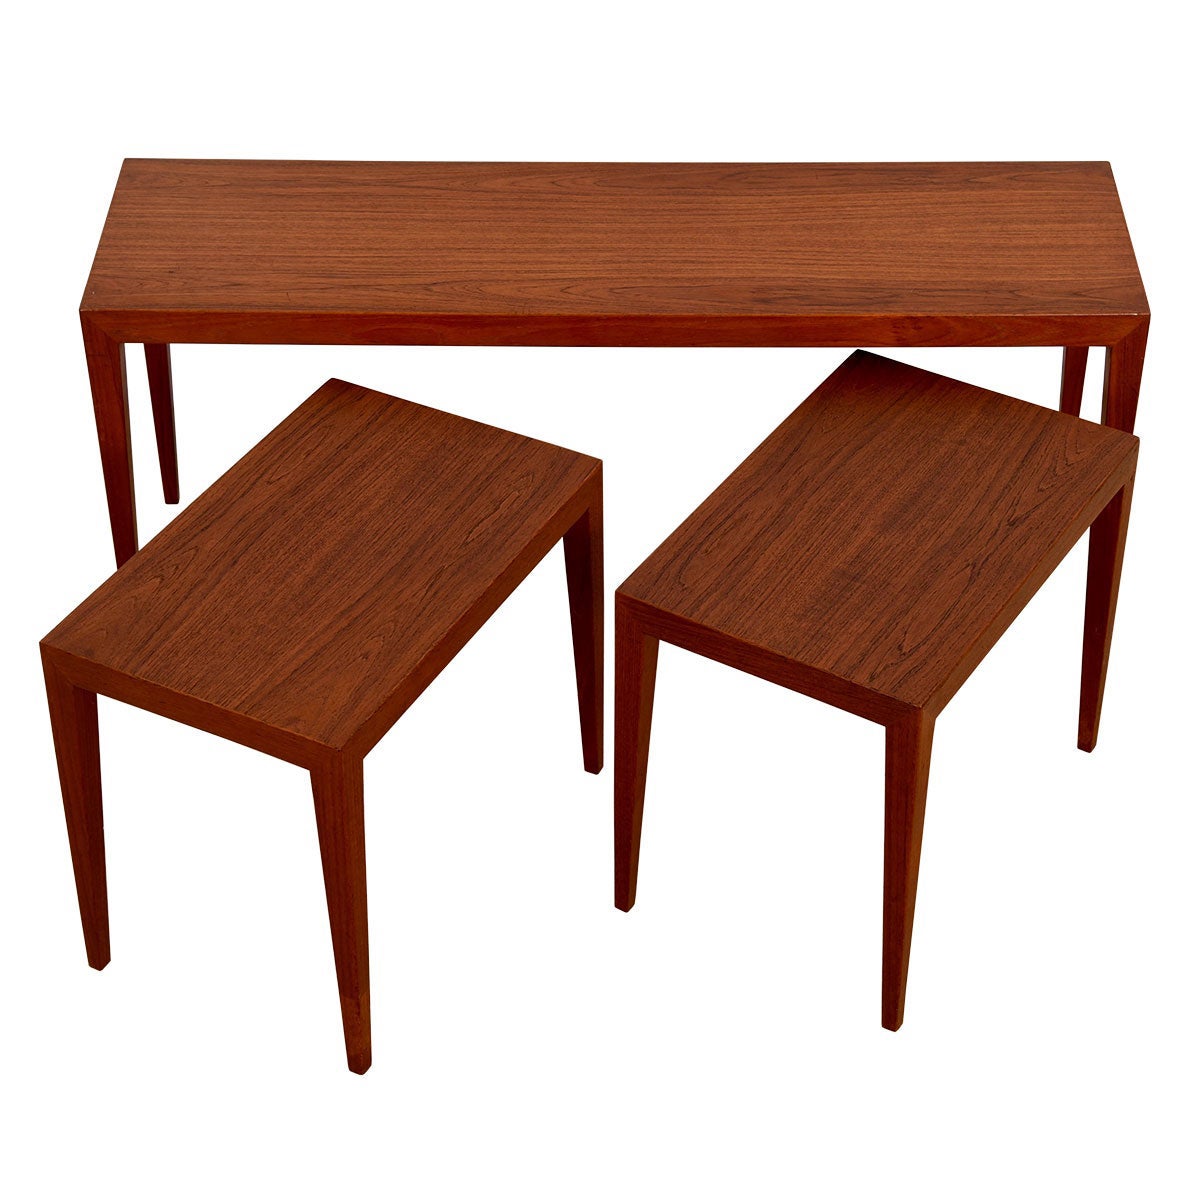 Rare Danish Teak Skinny Accent / Coffee Table with Pair Nesting Tables For Sale